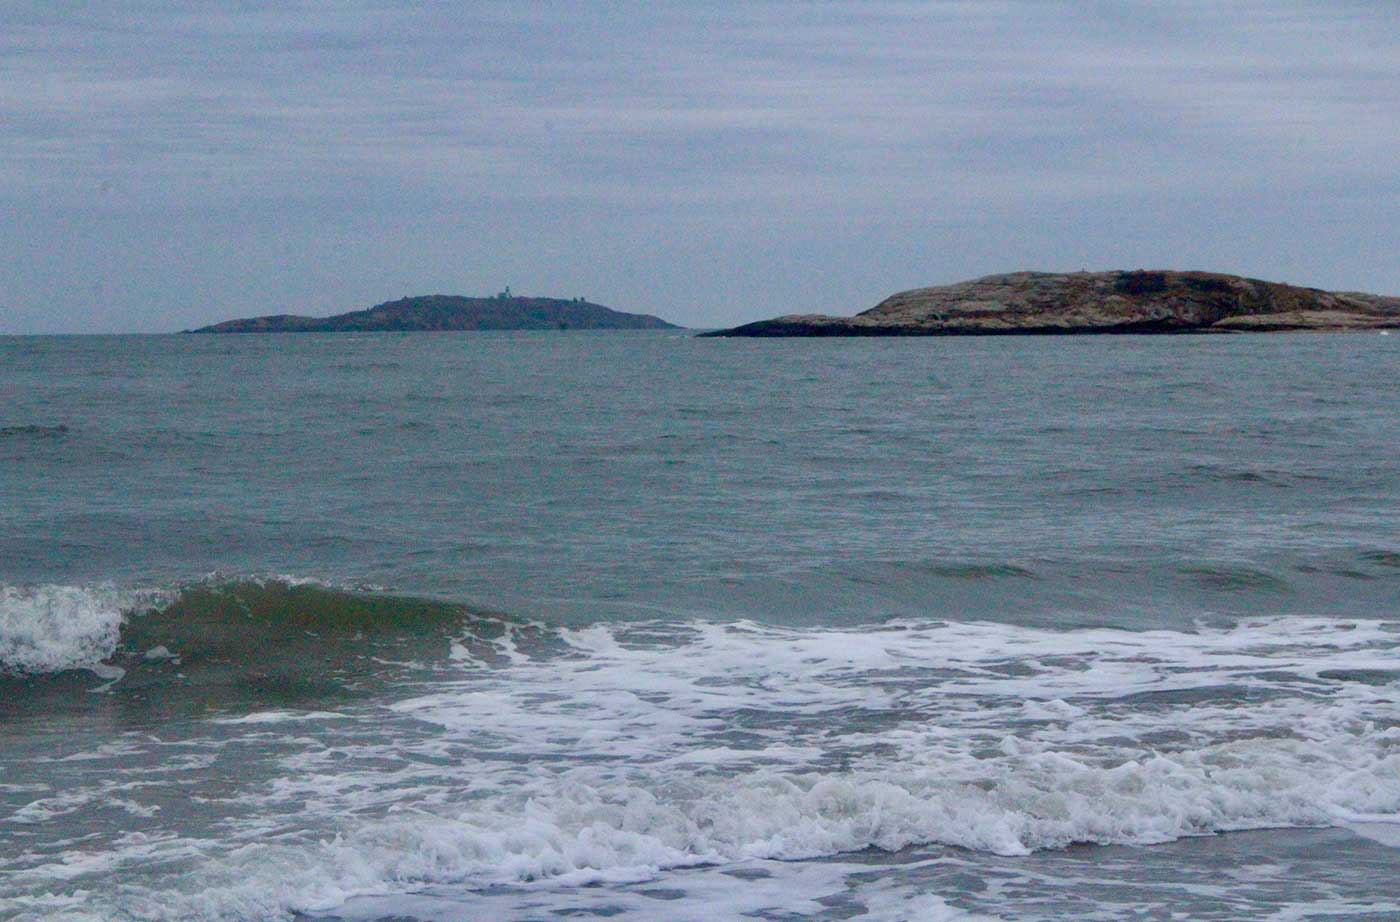 ocean waves with island behind them